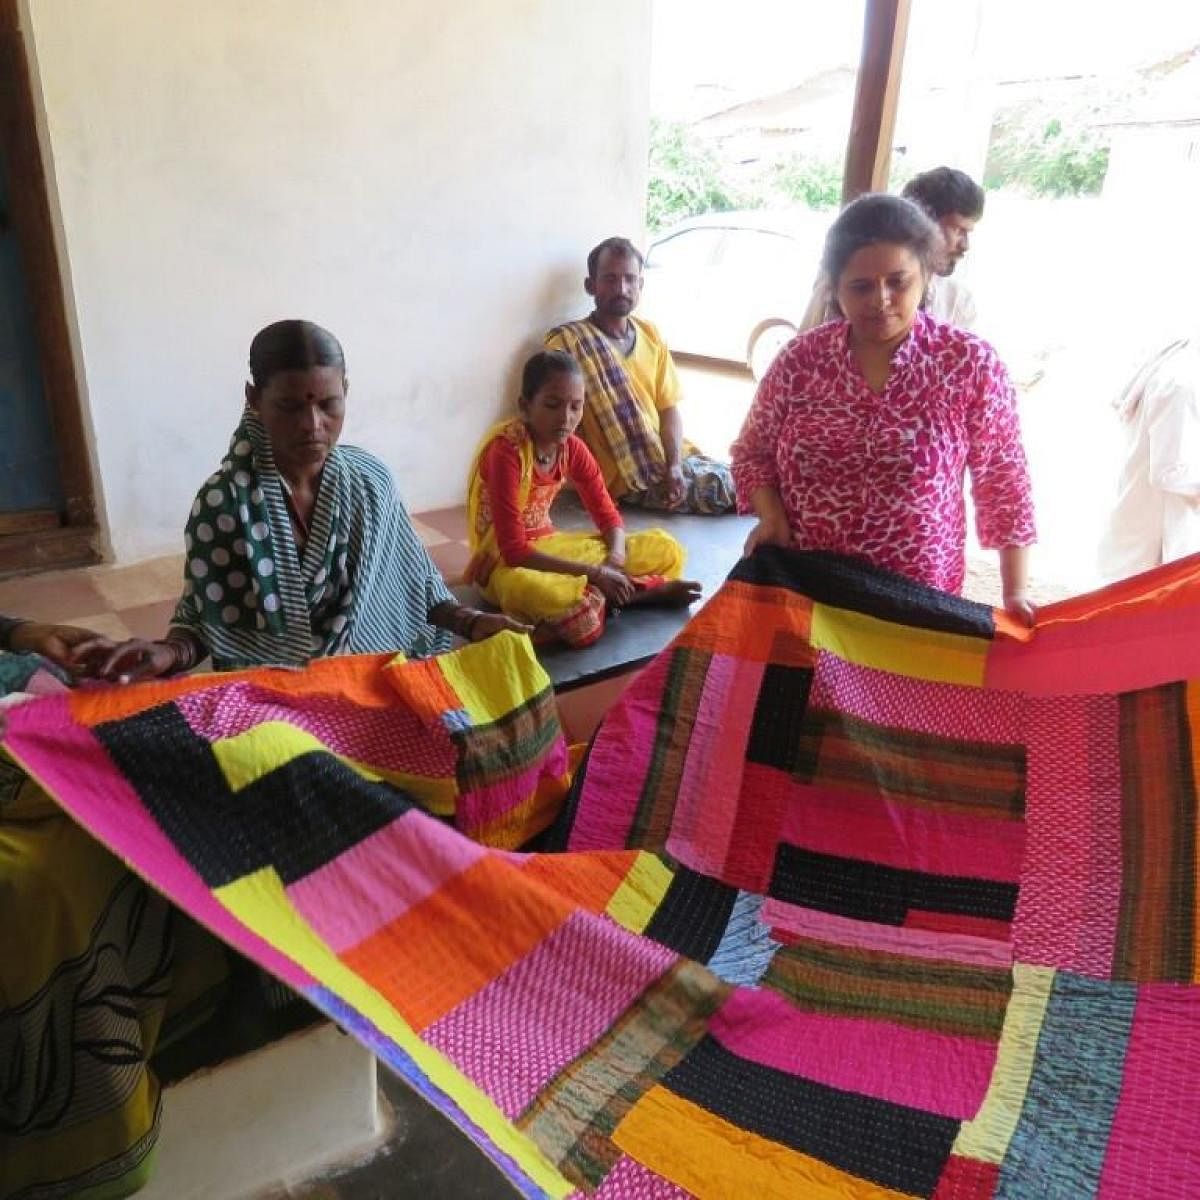 A product made by the women associated with Siri Village Art in Dharwad.